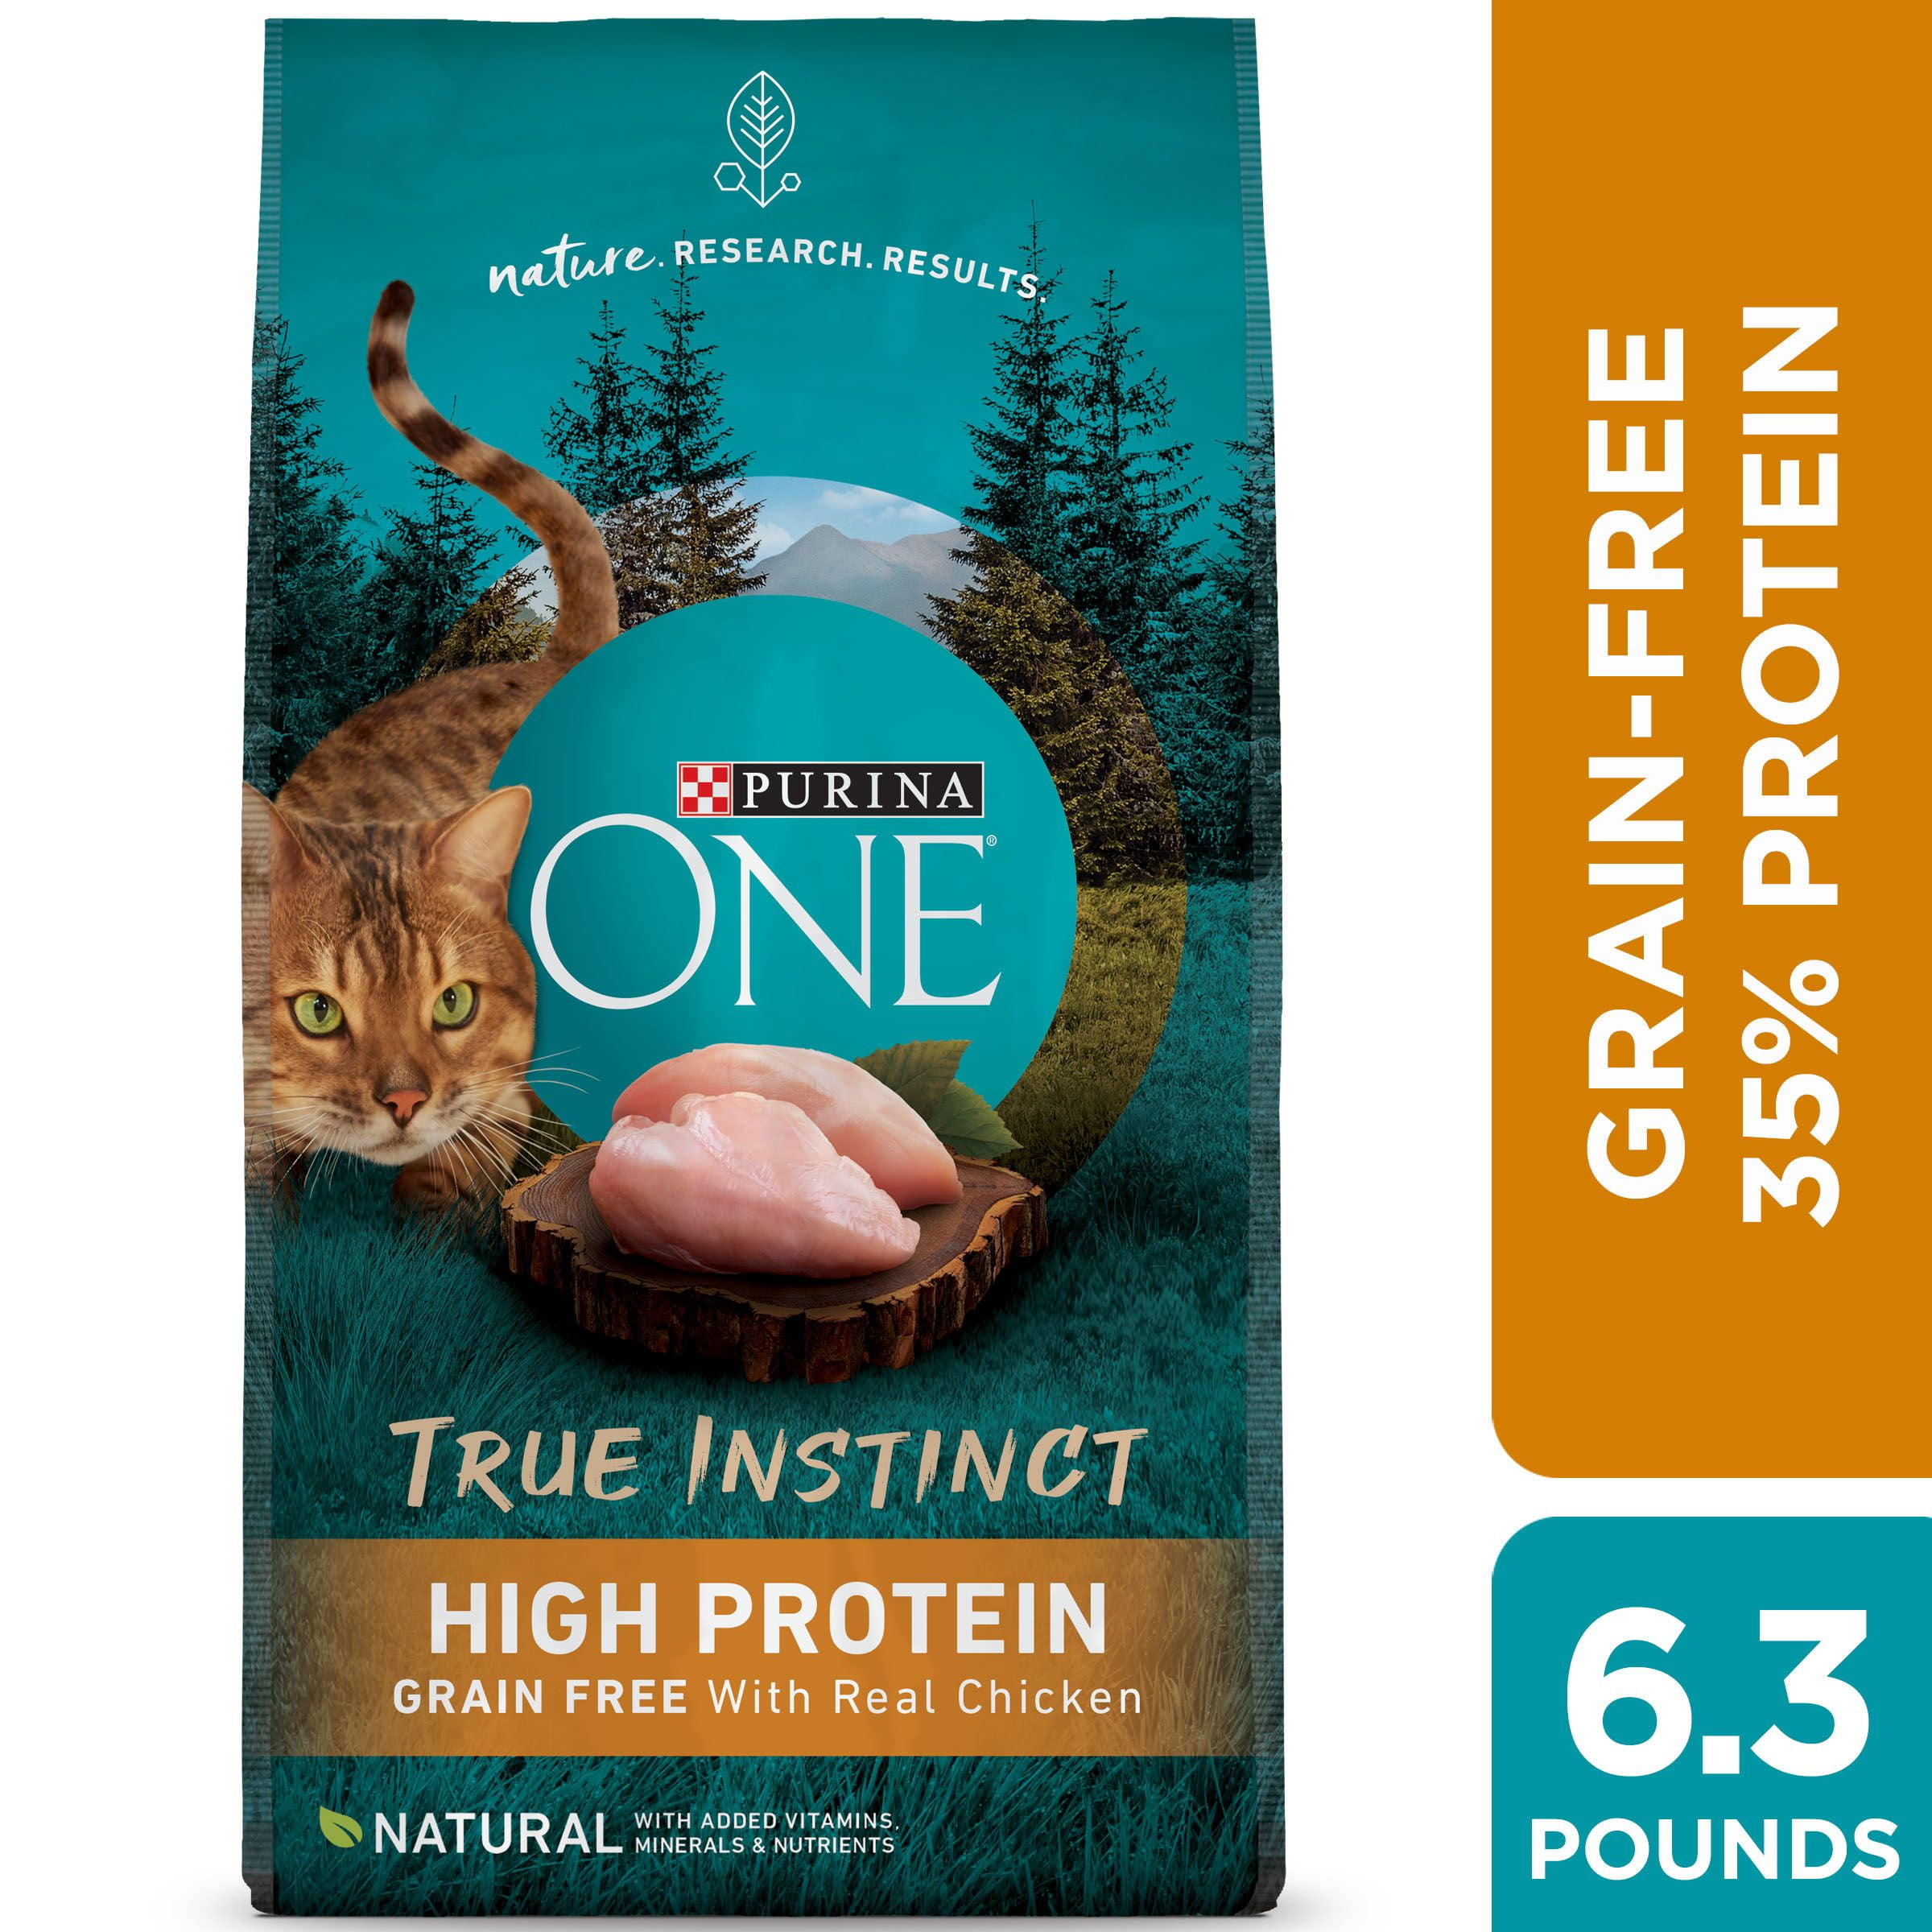 Purina Cat Chow Complete (6.3 lbs.) 17800145916 eBay